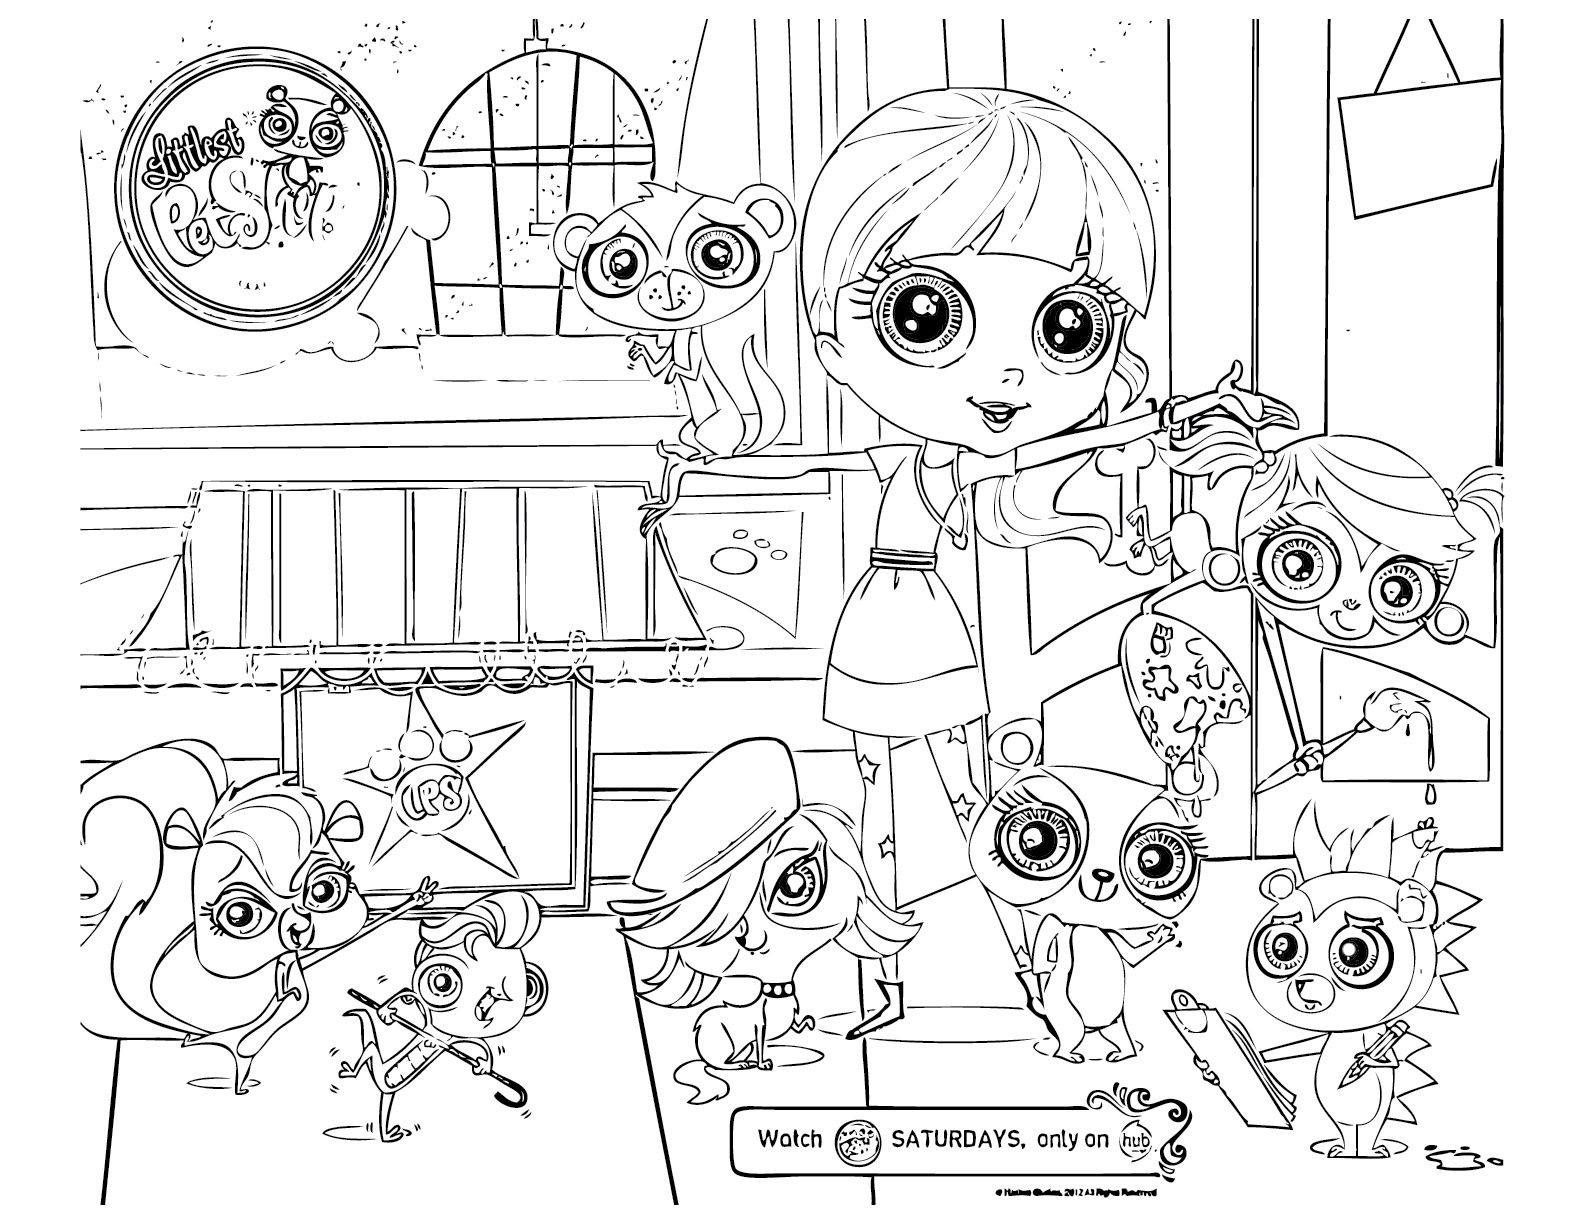 My Littlest Pet Shop Coloring Pages | Free Printable Coloring Pages - Littlest Pet Shop Free Printable Coloring Pages